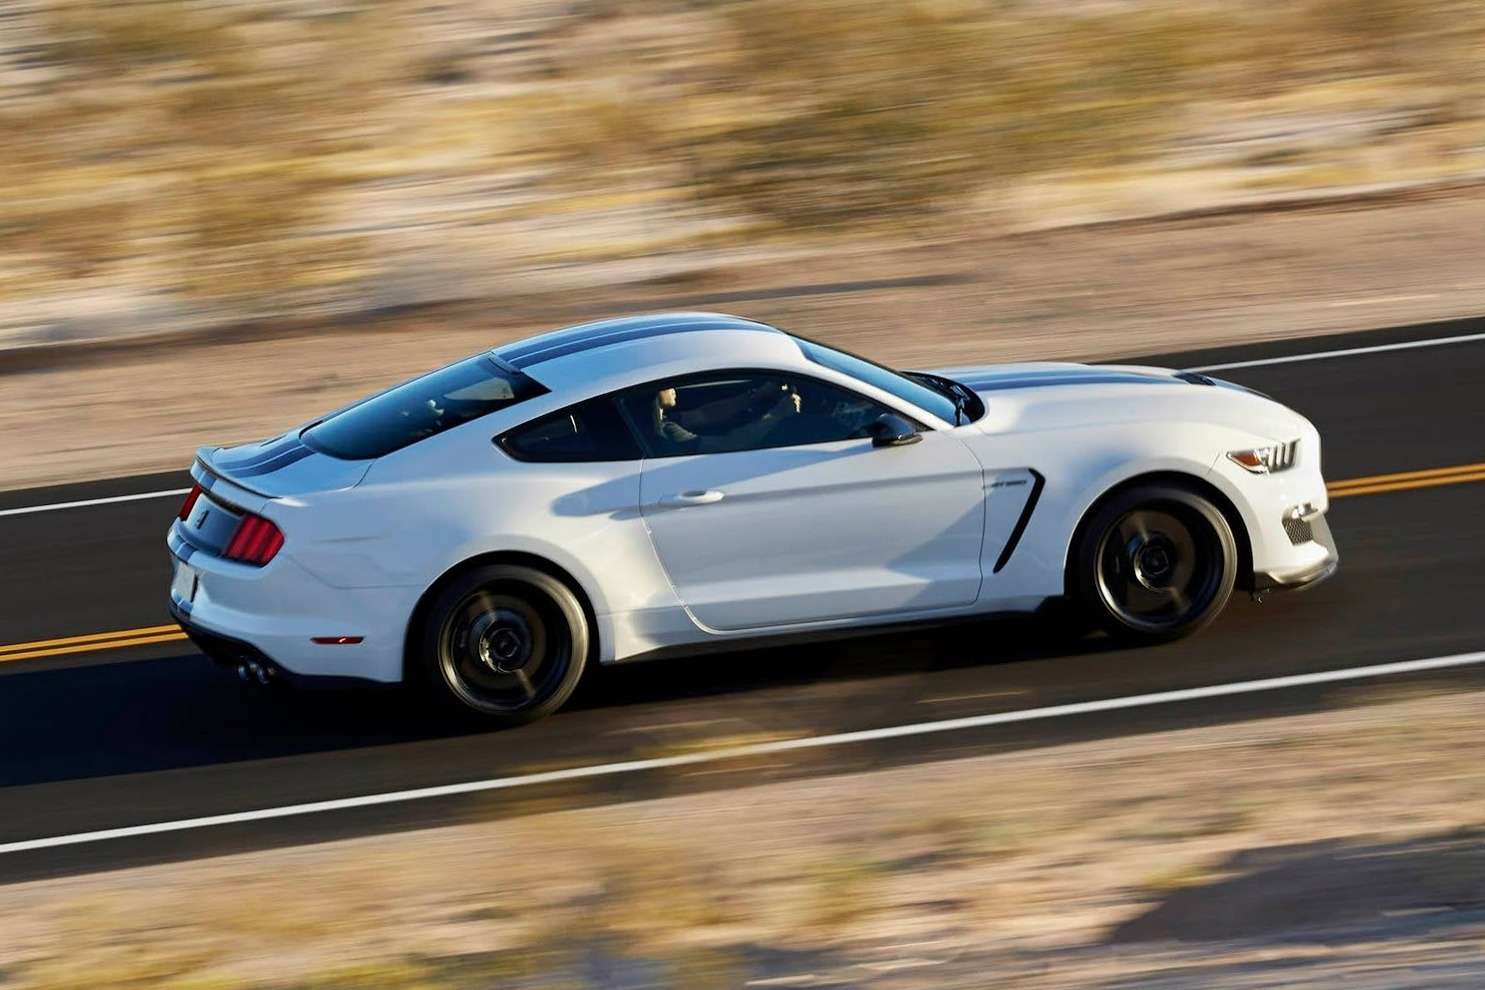 New-Ford-Mustang-Shelby-GT350-11